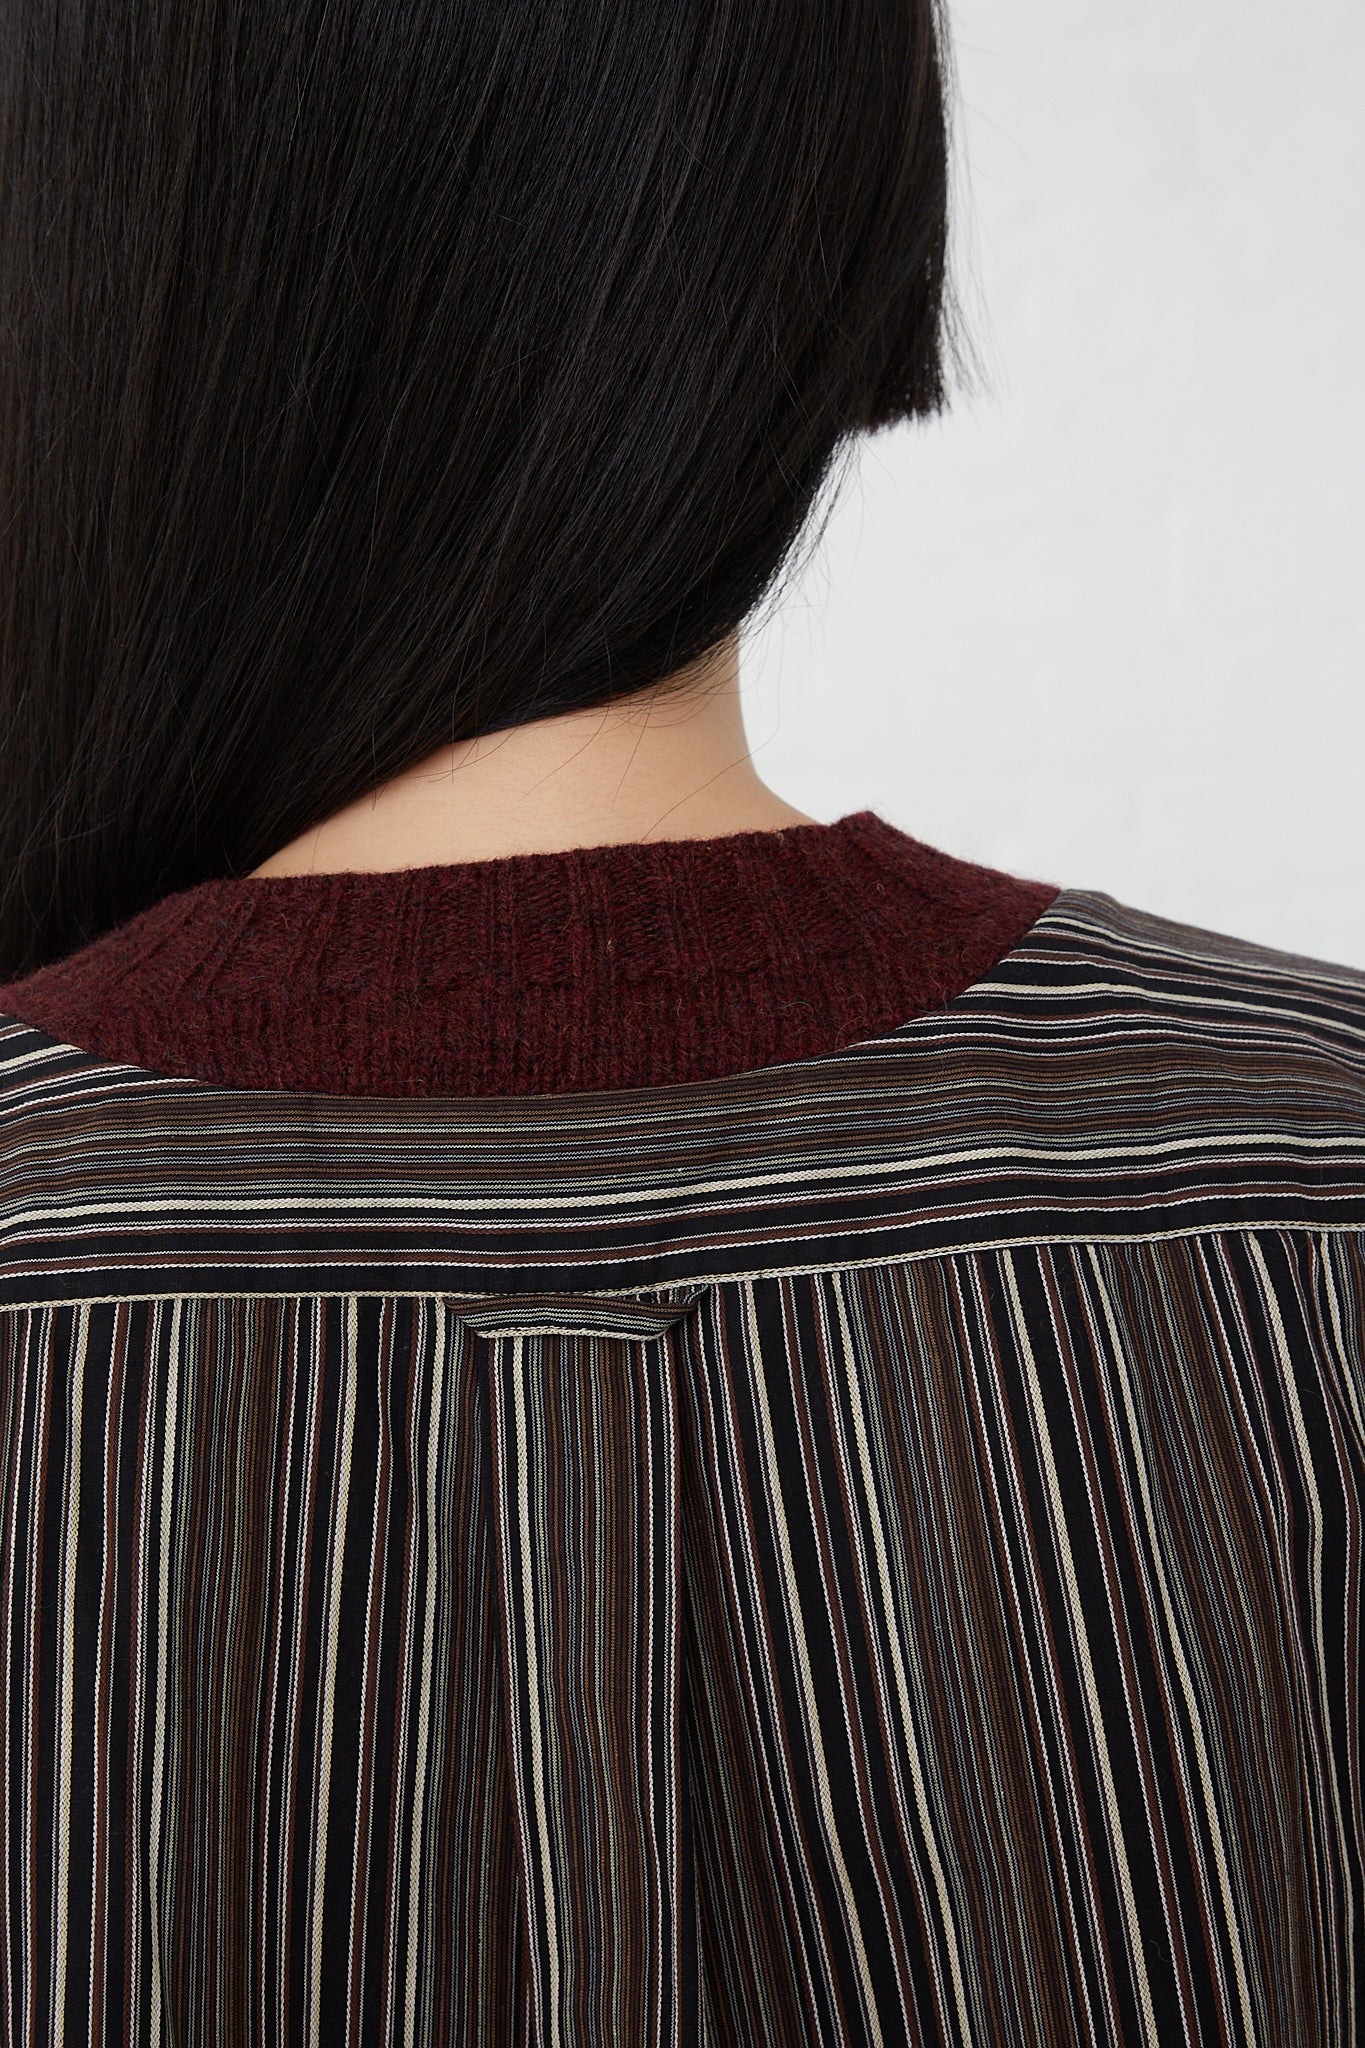 The woman is wearing the Bless No. 68 Front Insert Pullover in Stripe, a long sleeve pullover made of a wool and cotton blend fabric, with stripes on the back.